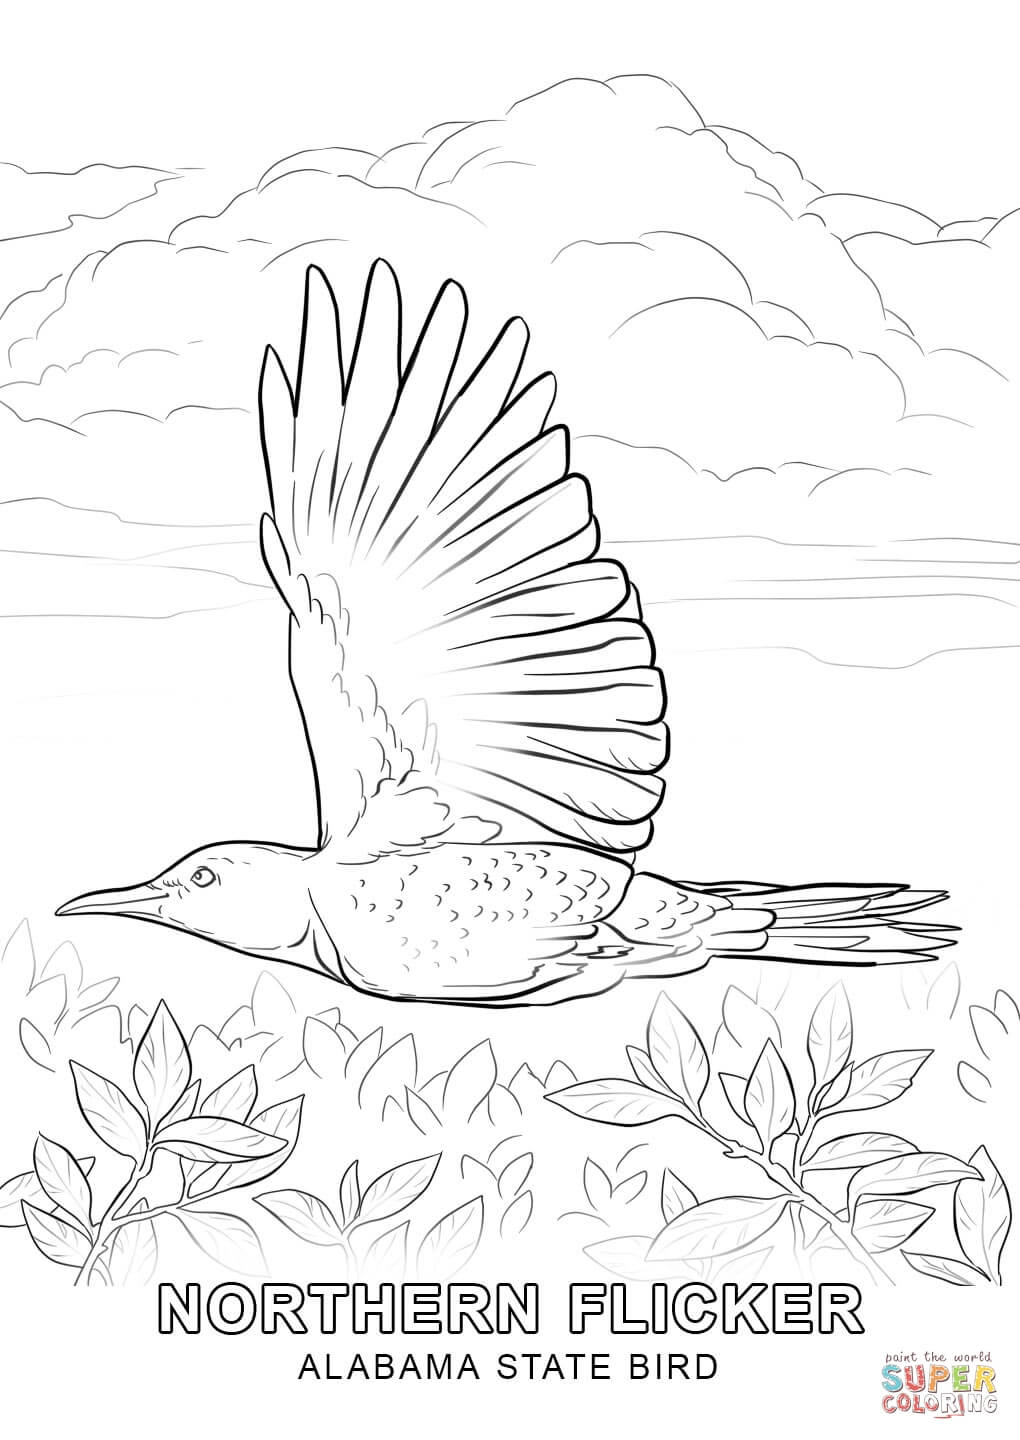 Alabama State Bird coloring page | Free Printable Coloring Pages